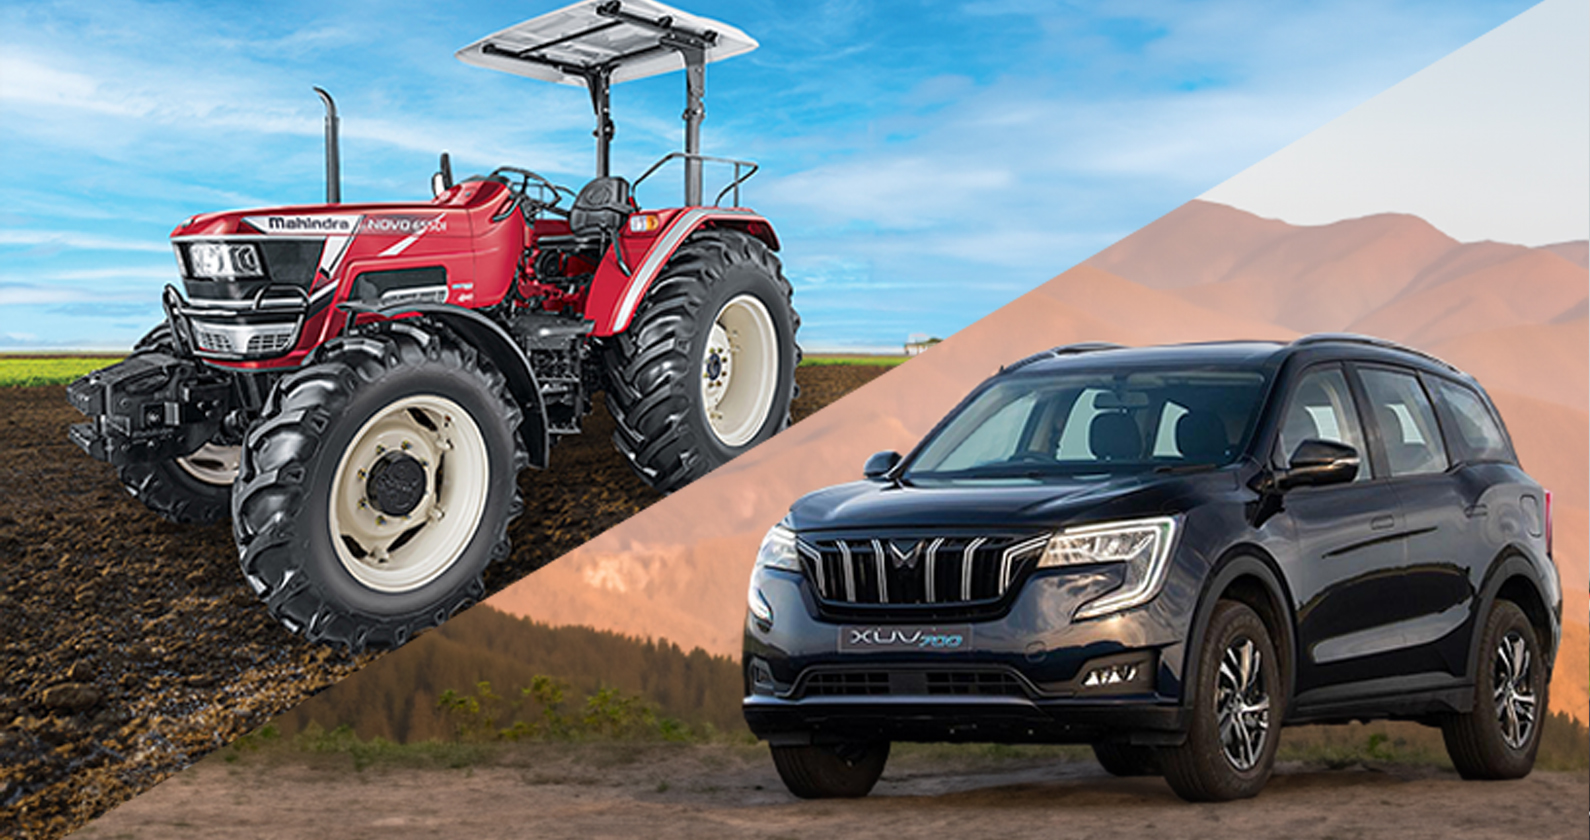 Diagonally split screen depicting two Mahindra vehicles: a black SUV and a red tractor